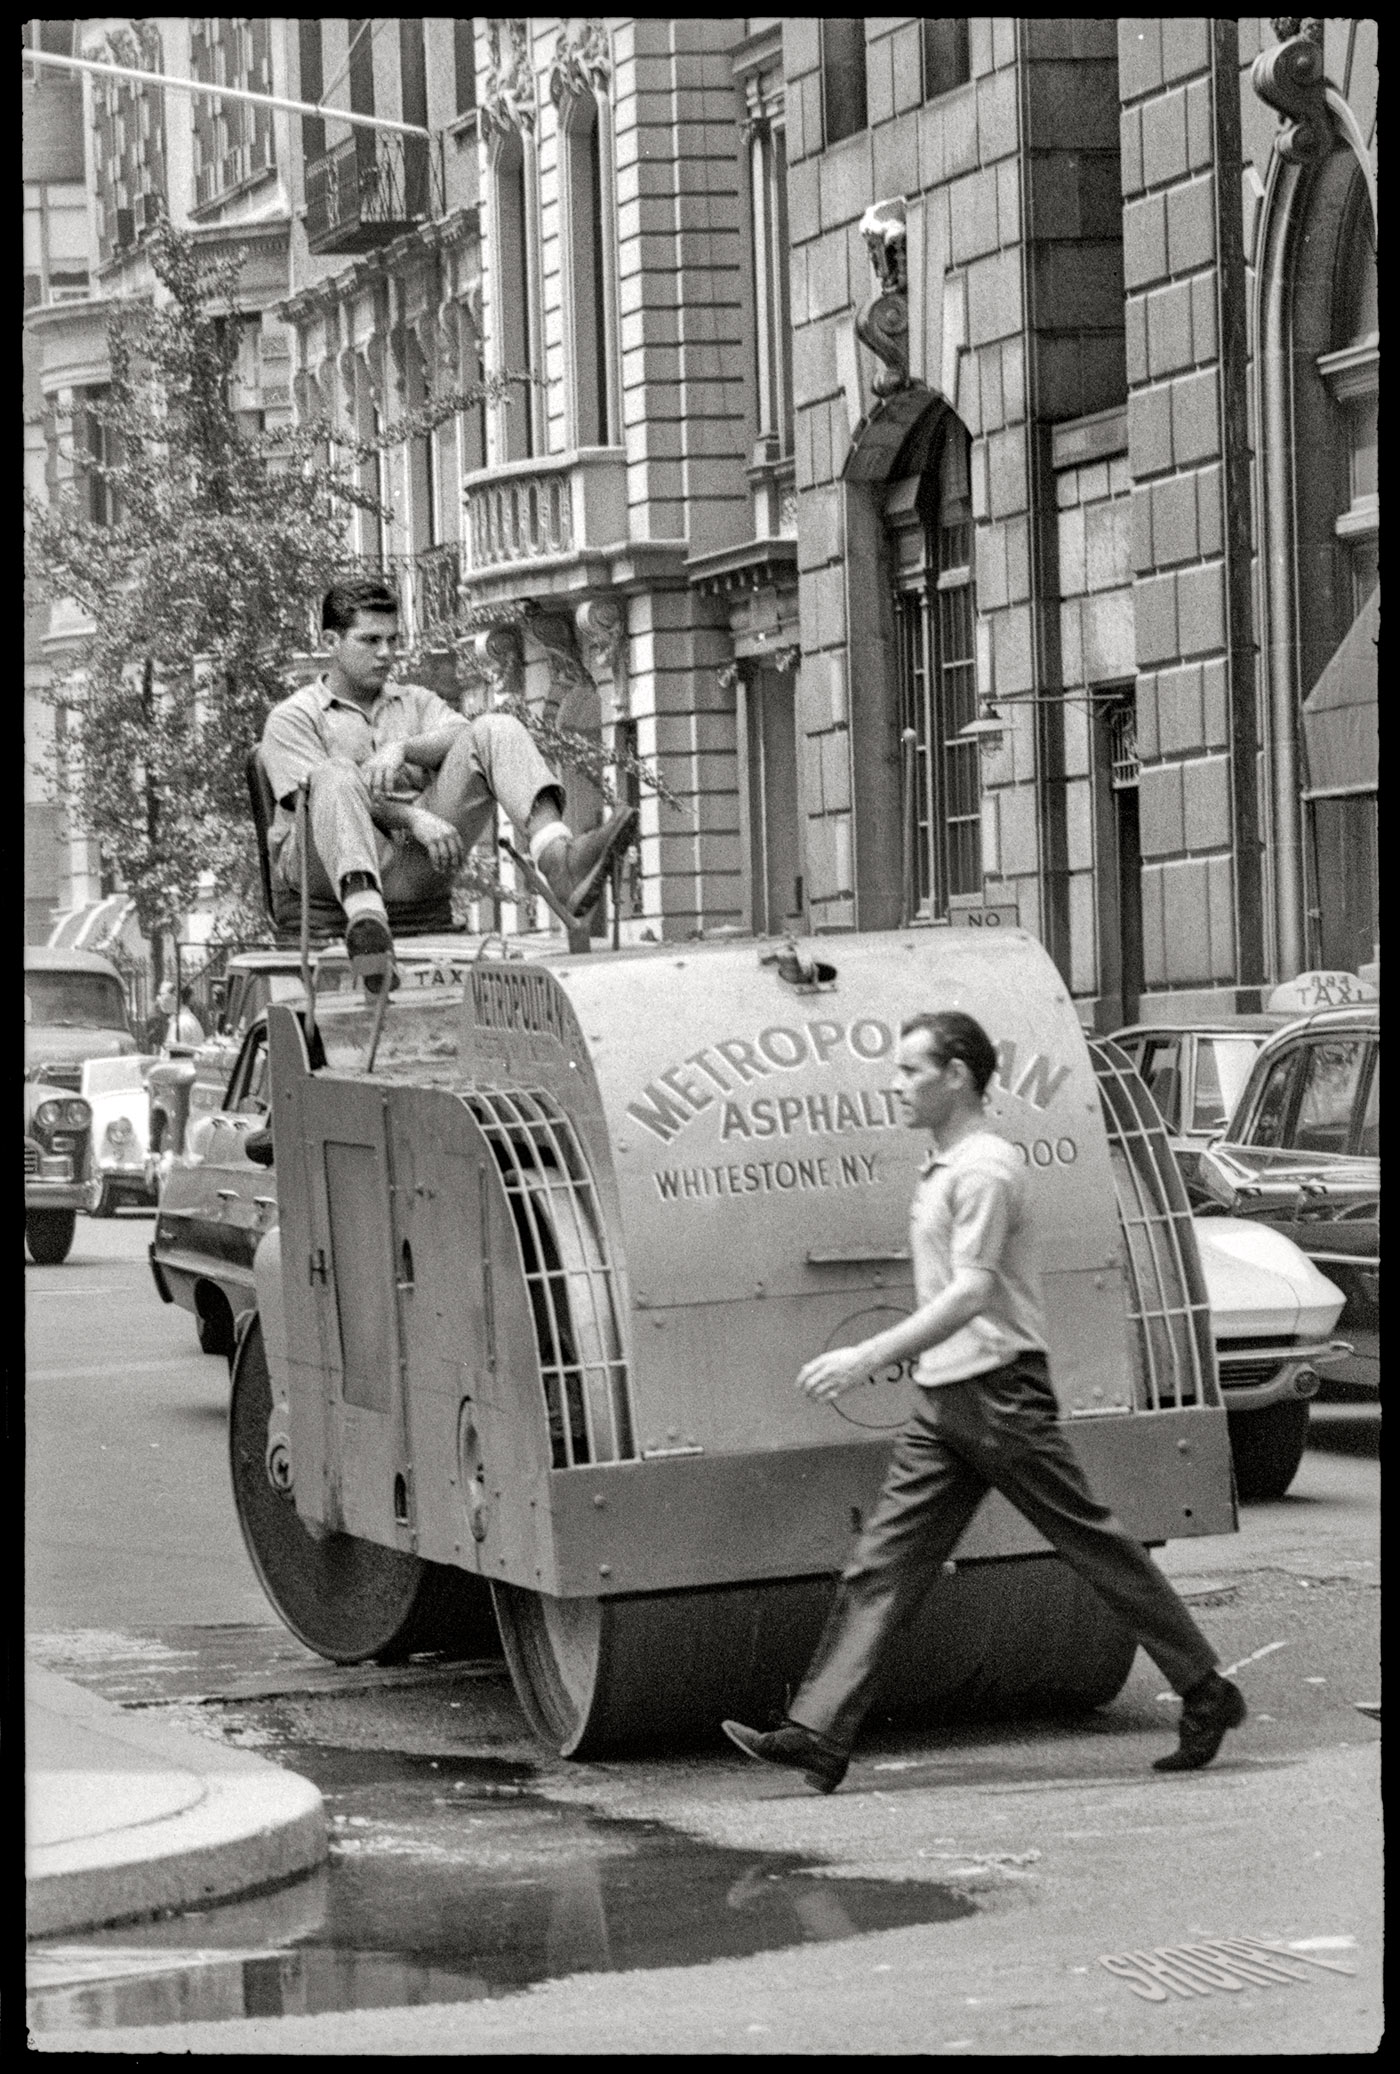 July 1964. New York. "Man walking in front of construction worker driving asphalt paver." From that day on, his friends called him "Stretch." 35mm negative by Angelo Rizzuto. View full size.